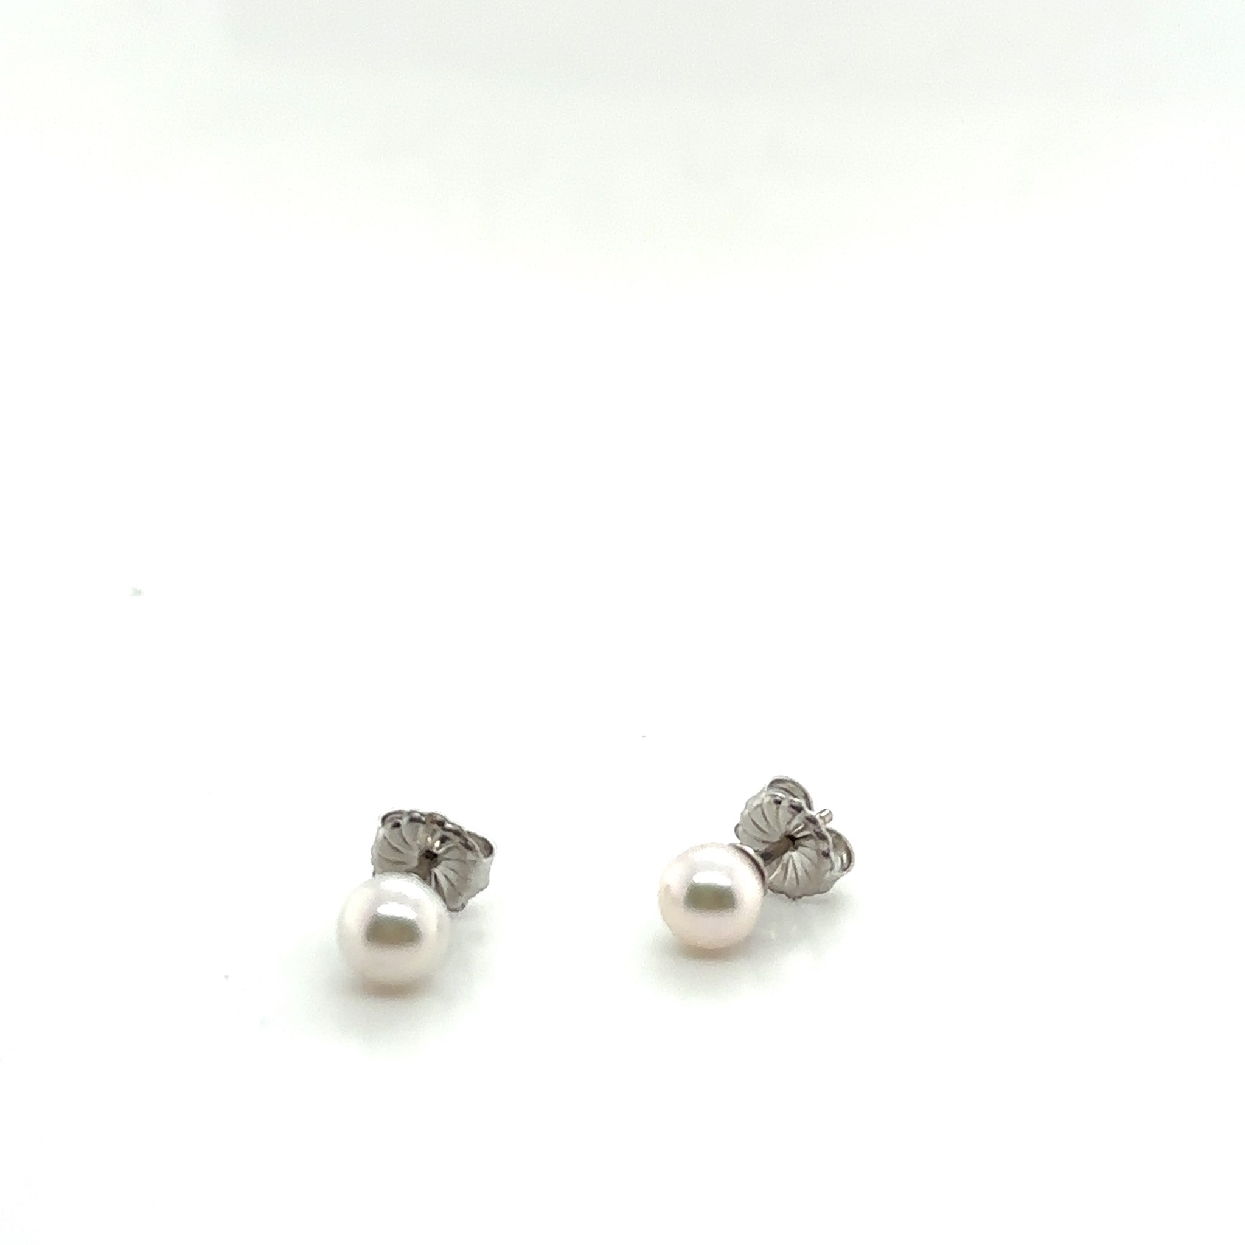 6mm Akoya Pearls With 14K White Gold Stud Backings